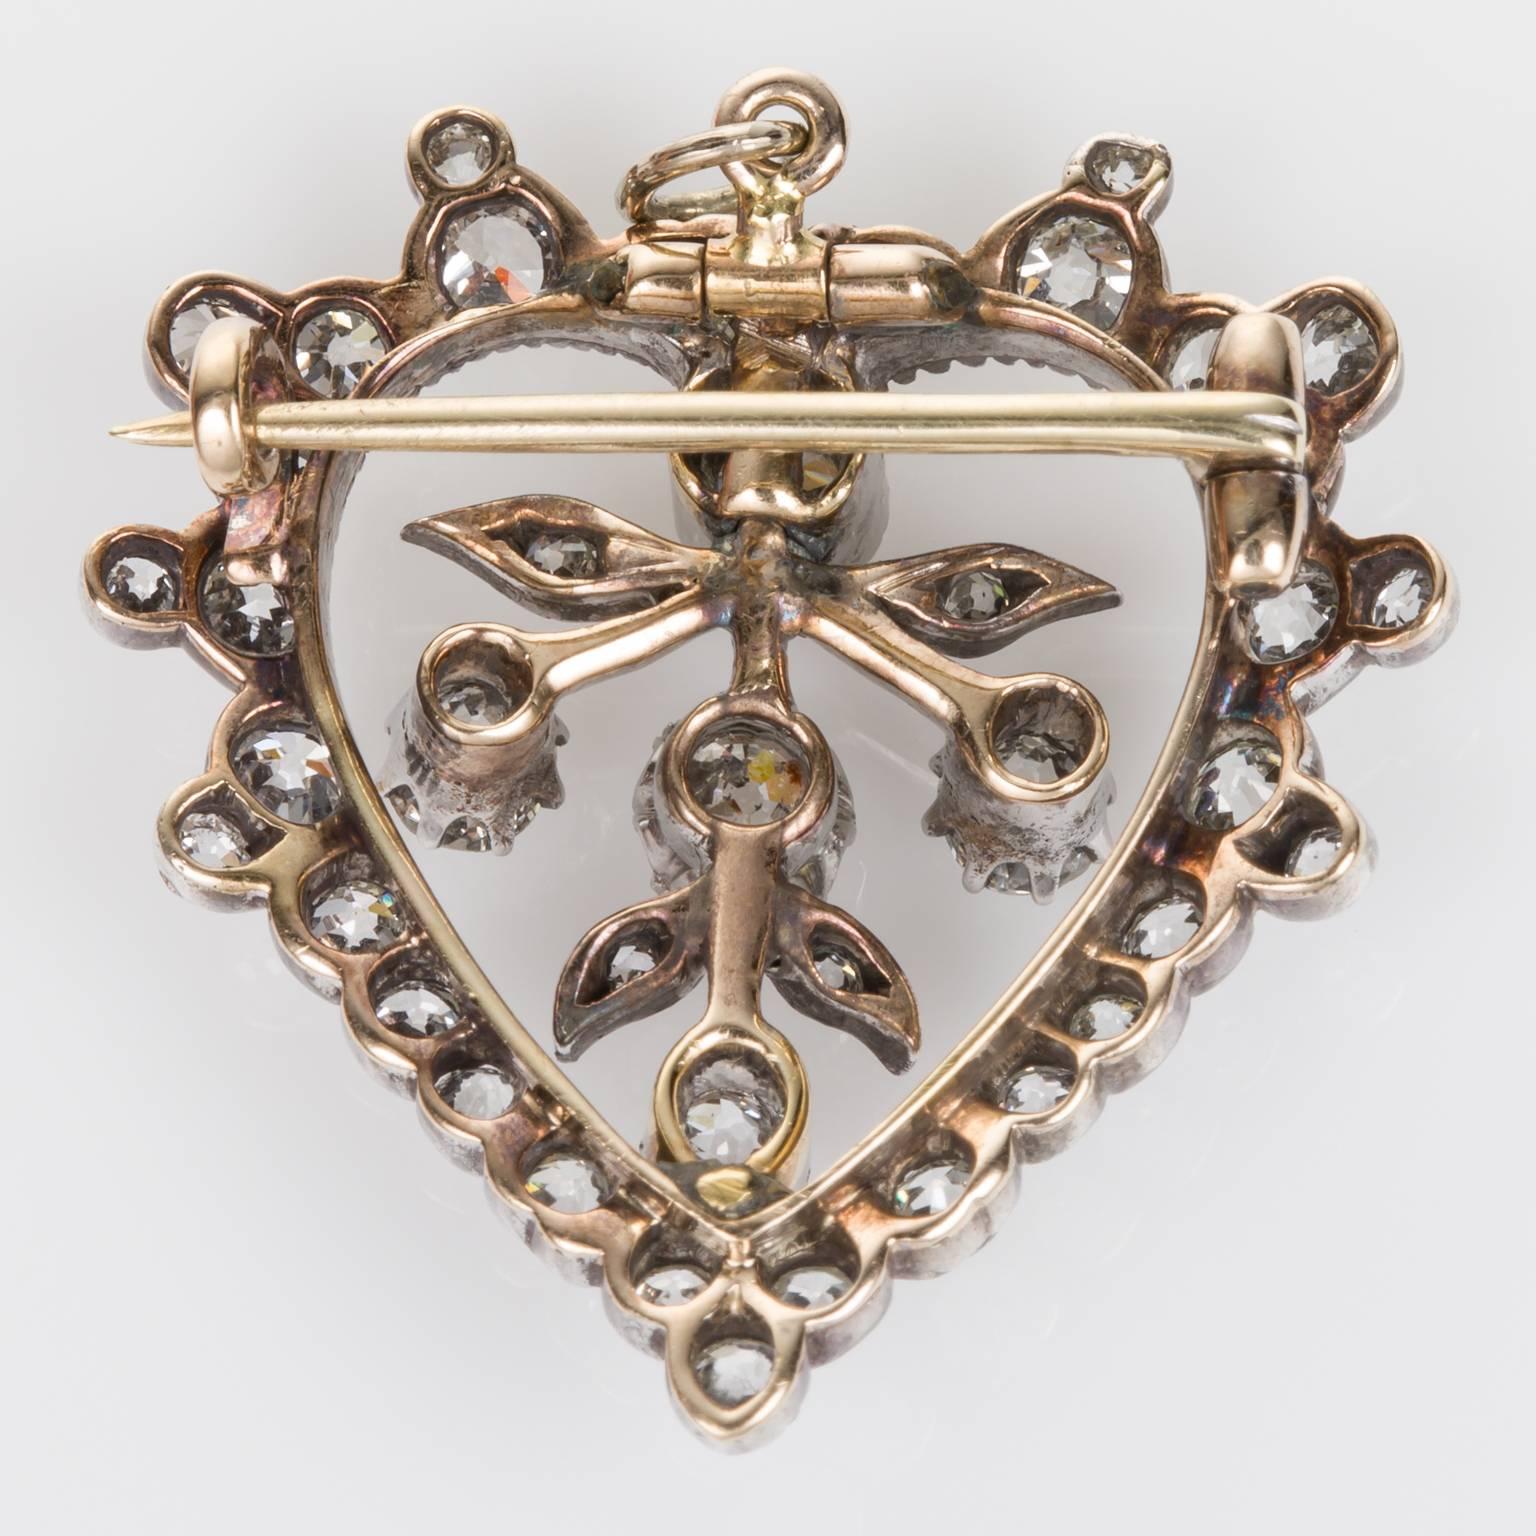 Old world charm meets modern day elegance. A beautiful Victorian silver over gold heart-shaped diamond pendant or brooch, set with 39 old European cut diamonds weighing approximately 1.75cts. It has multiple looks and can become a 'go-to' piece in